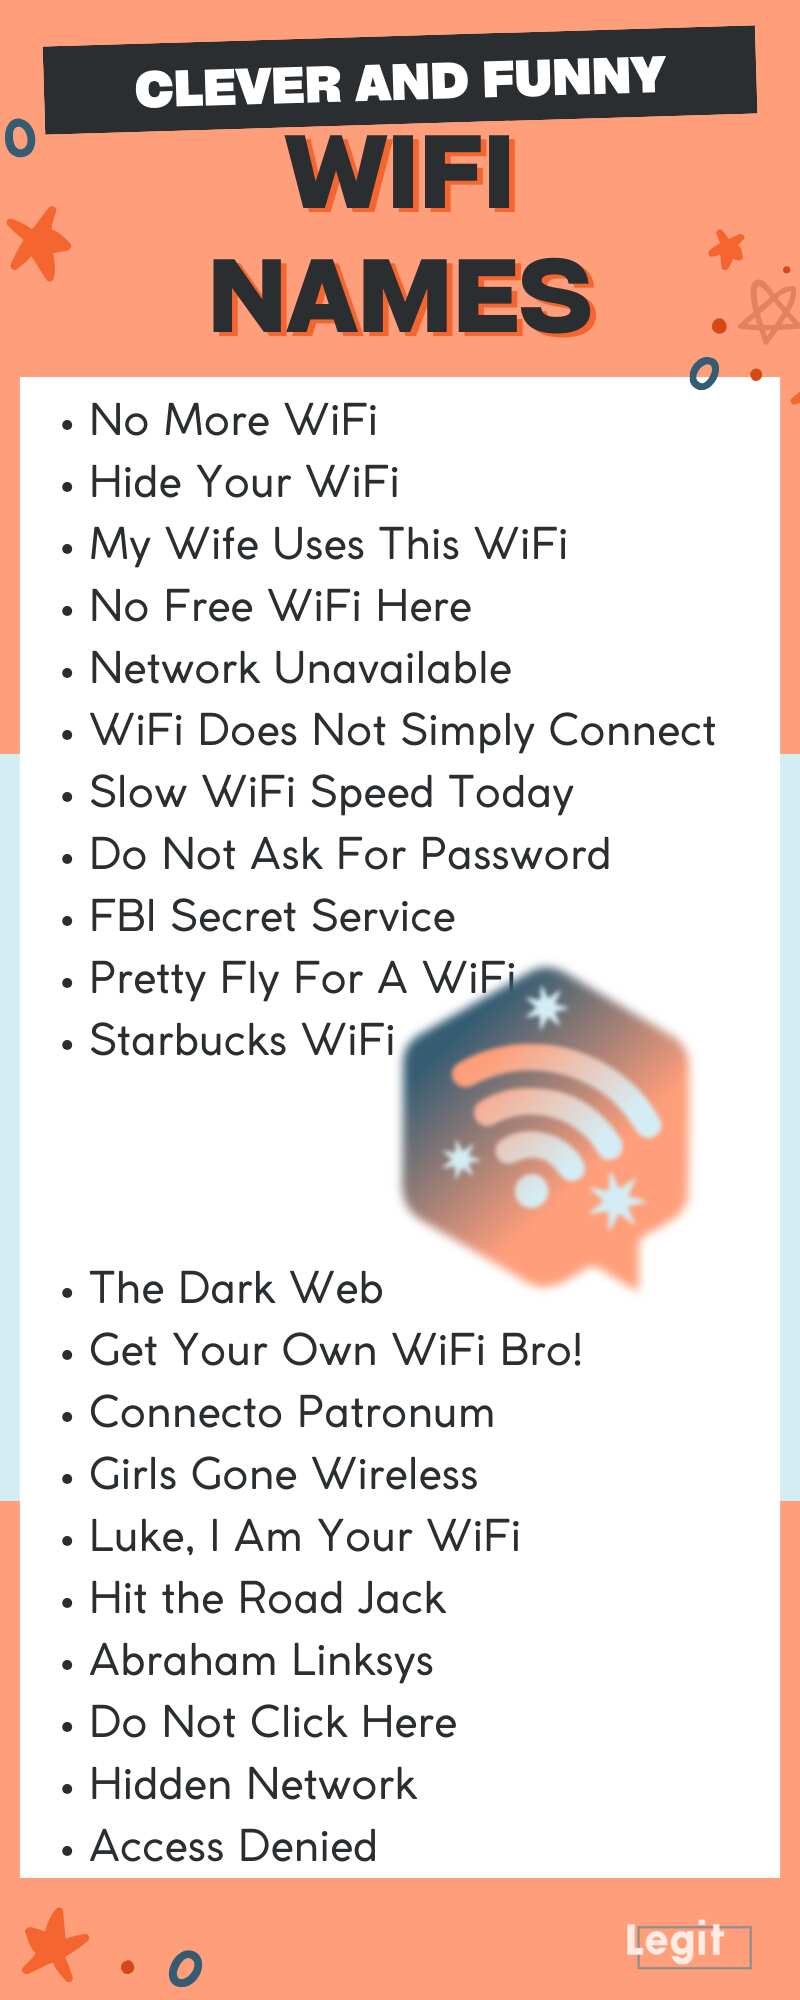 Clever and funny WiFi names